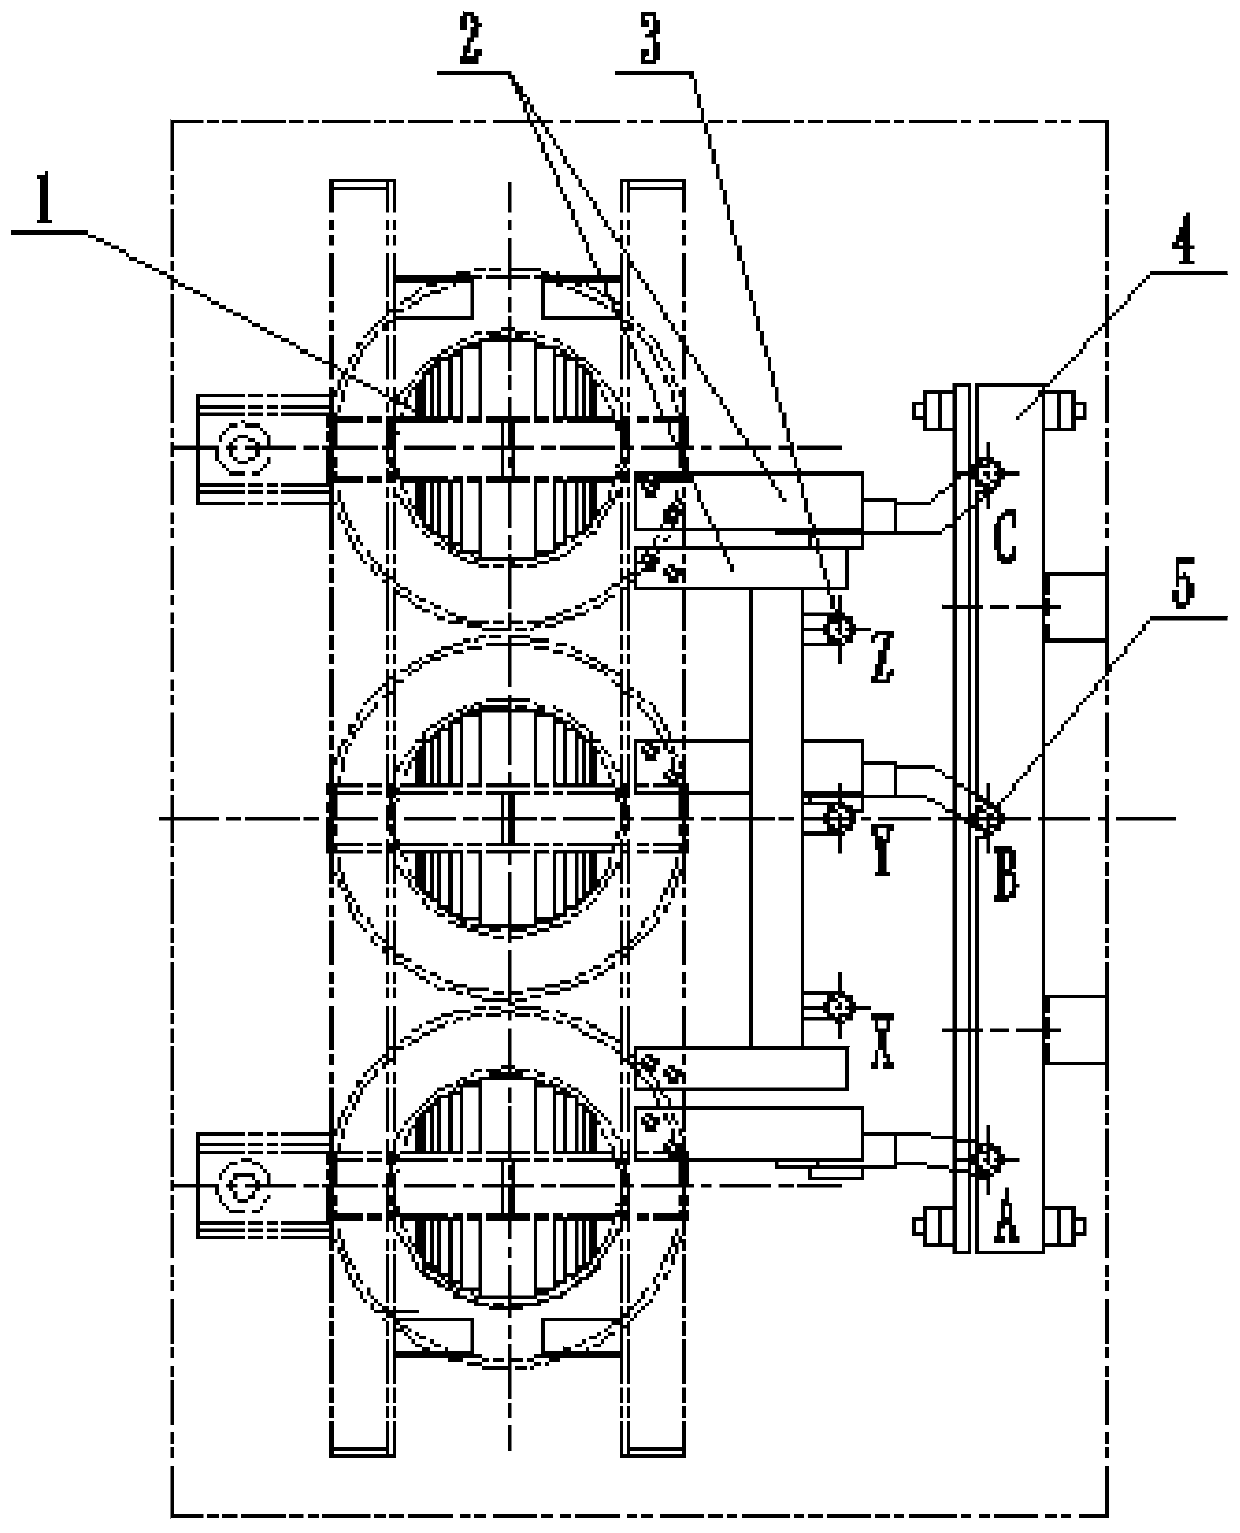 Lead device of oil-immersed series reactor